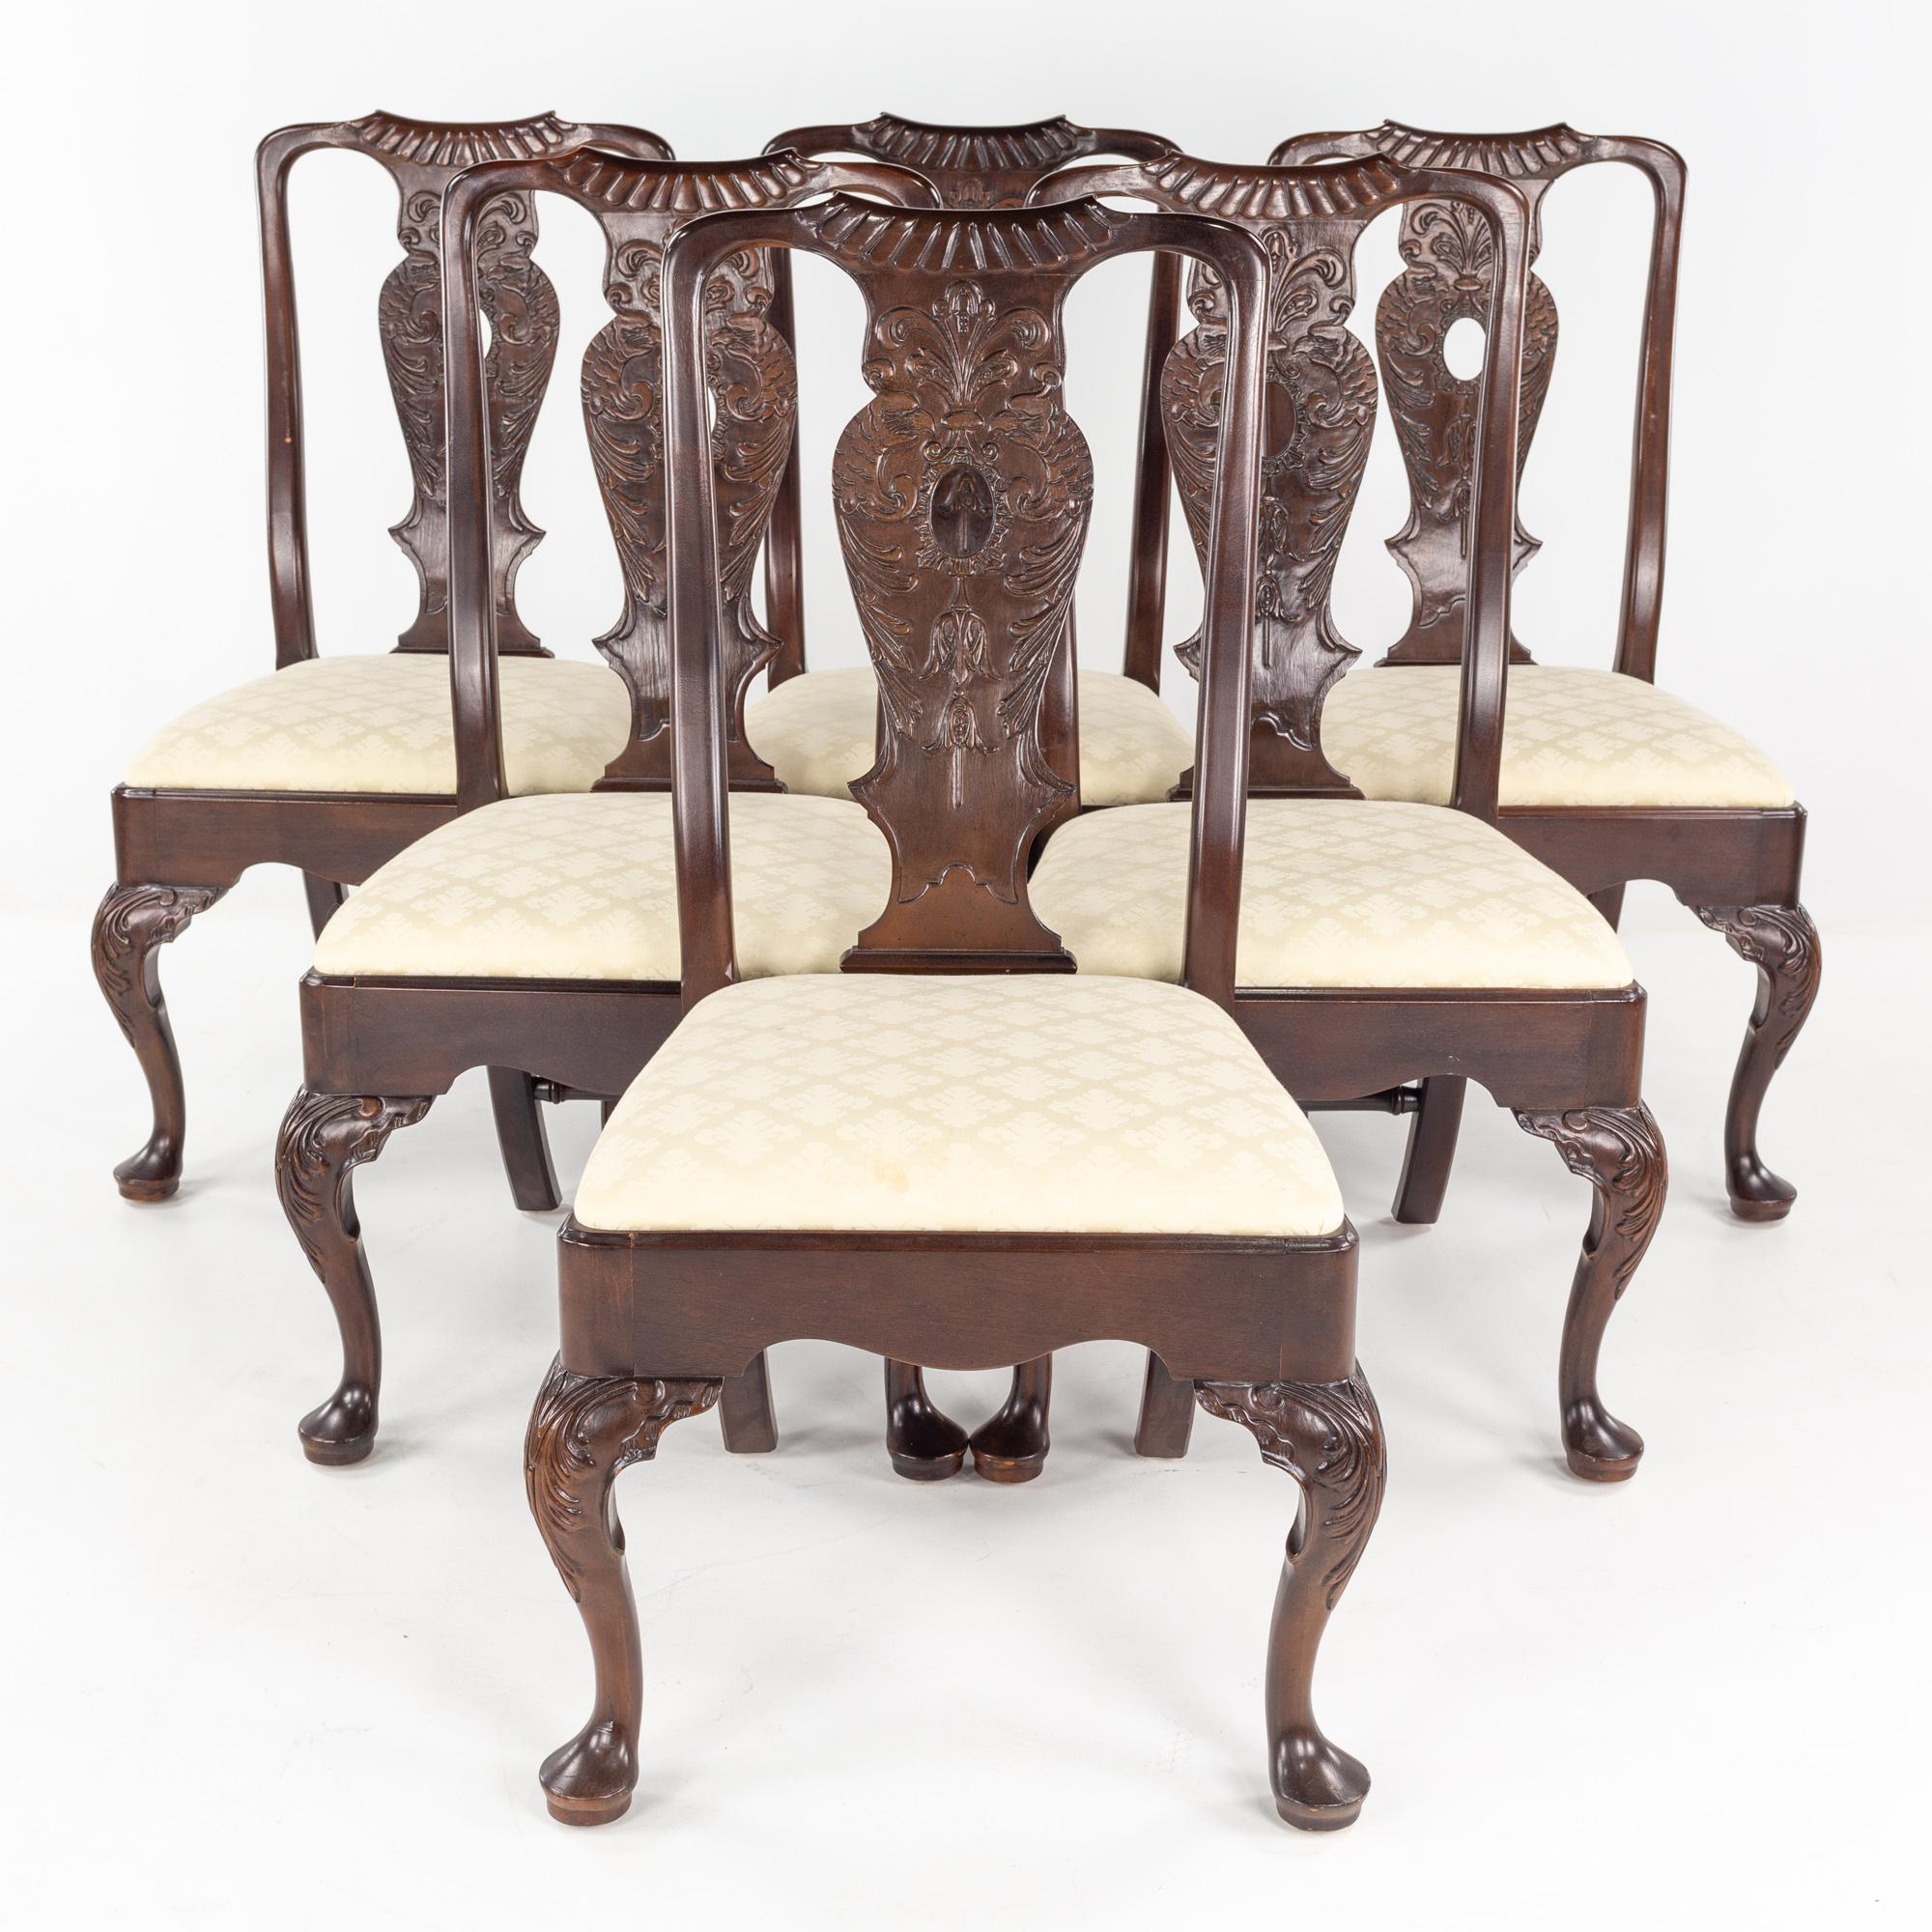 Henredon Aston Court Mahogany dining chairs - Set of 6

Each chair measures: 21 wide x 21 deep x 40 inches high, with a seat height of 17 inches

This set is in Great Vintage Condition with minor marks, dents, and wear.

About Photos: We take